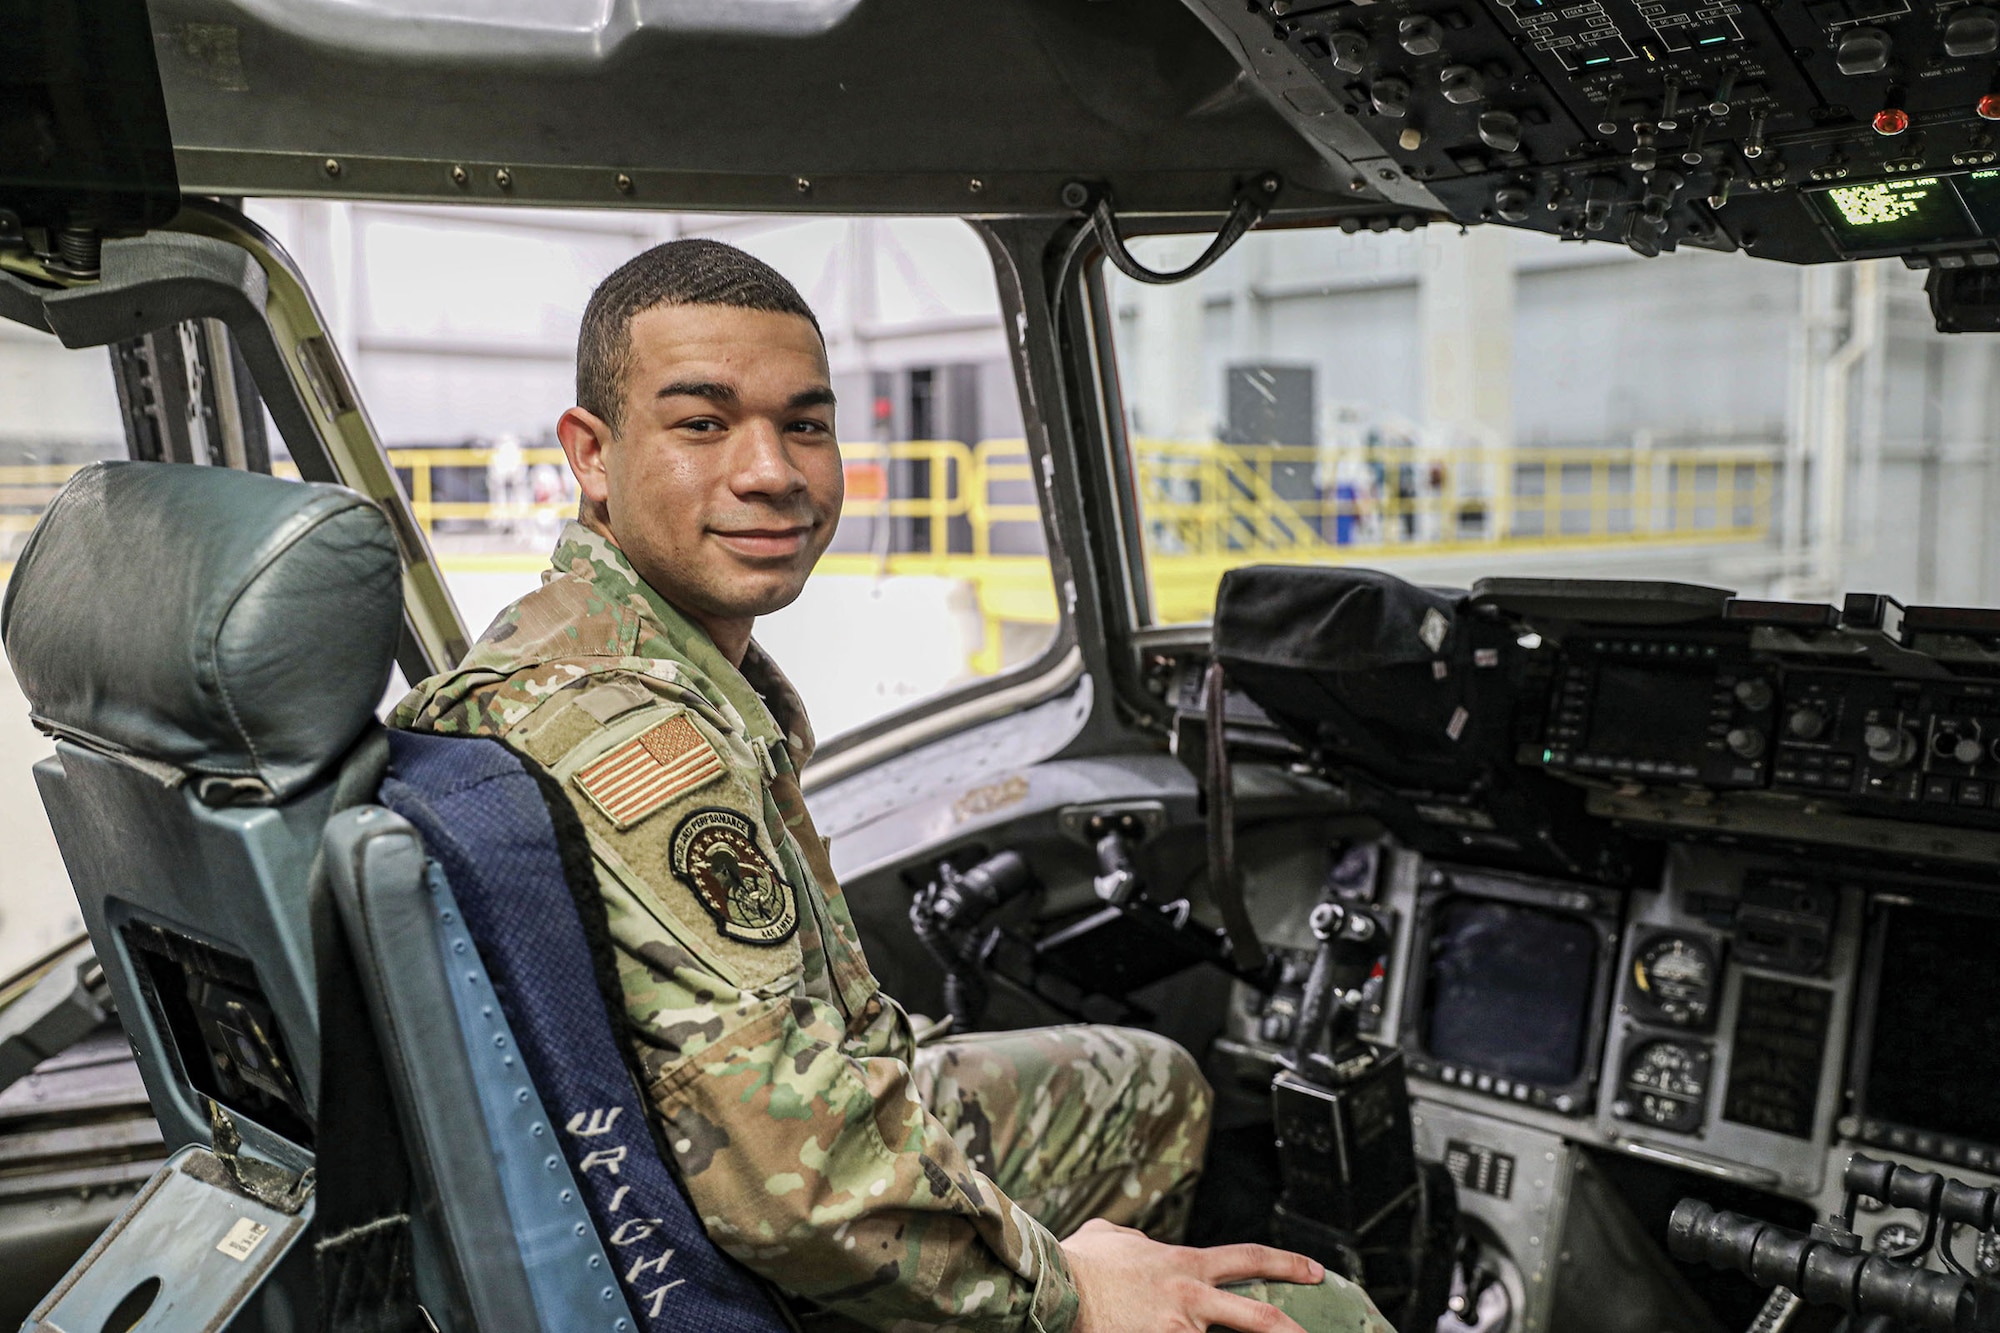 Senior Airman Jacob D. Dorsey, a crew chief with the 445th Aircraft Maintenance Squadron, was accepted to the Air Force Academy with the ultimate goal of flying the same aircraft that he currently maintains; the C-17 Globemaster III.